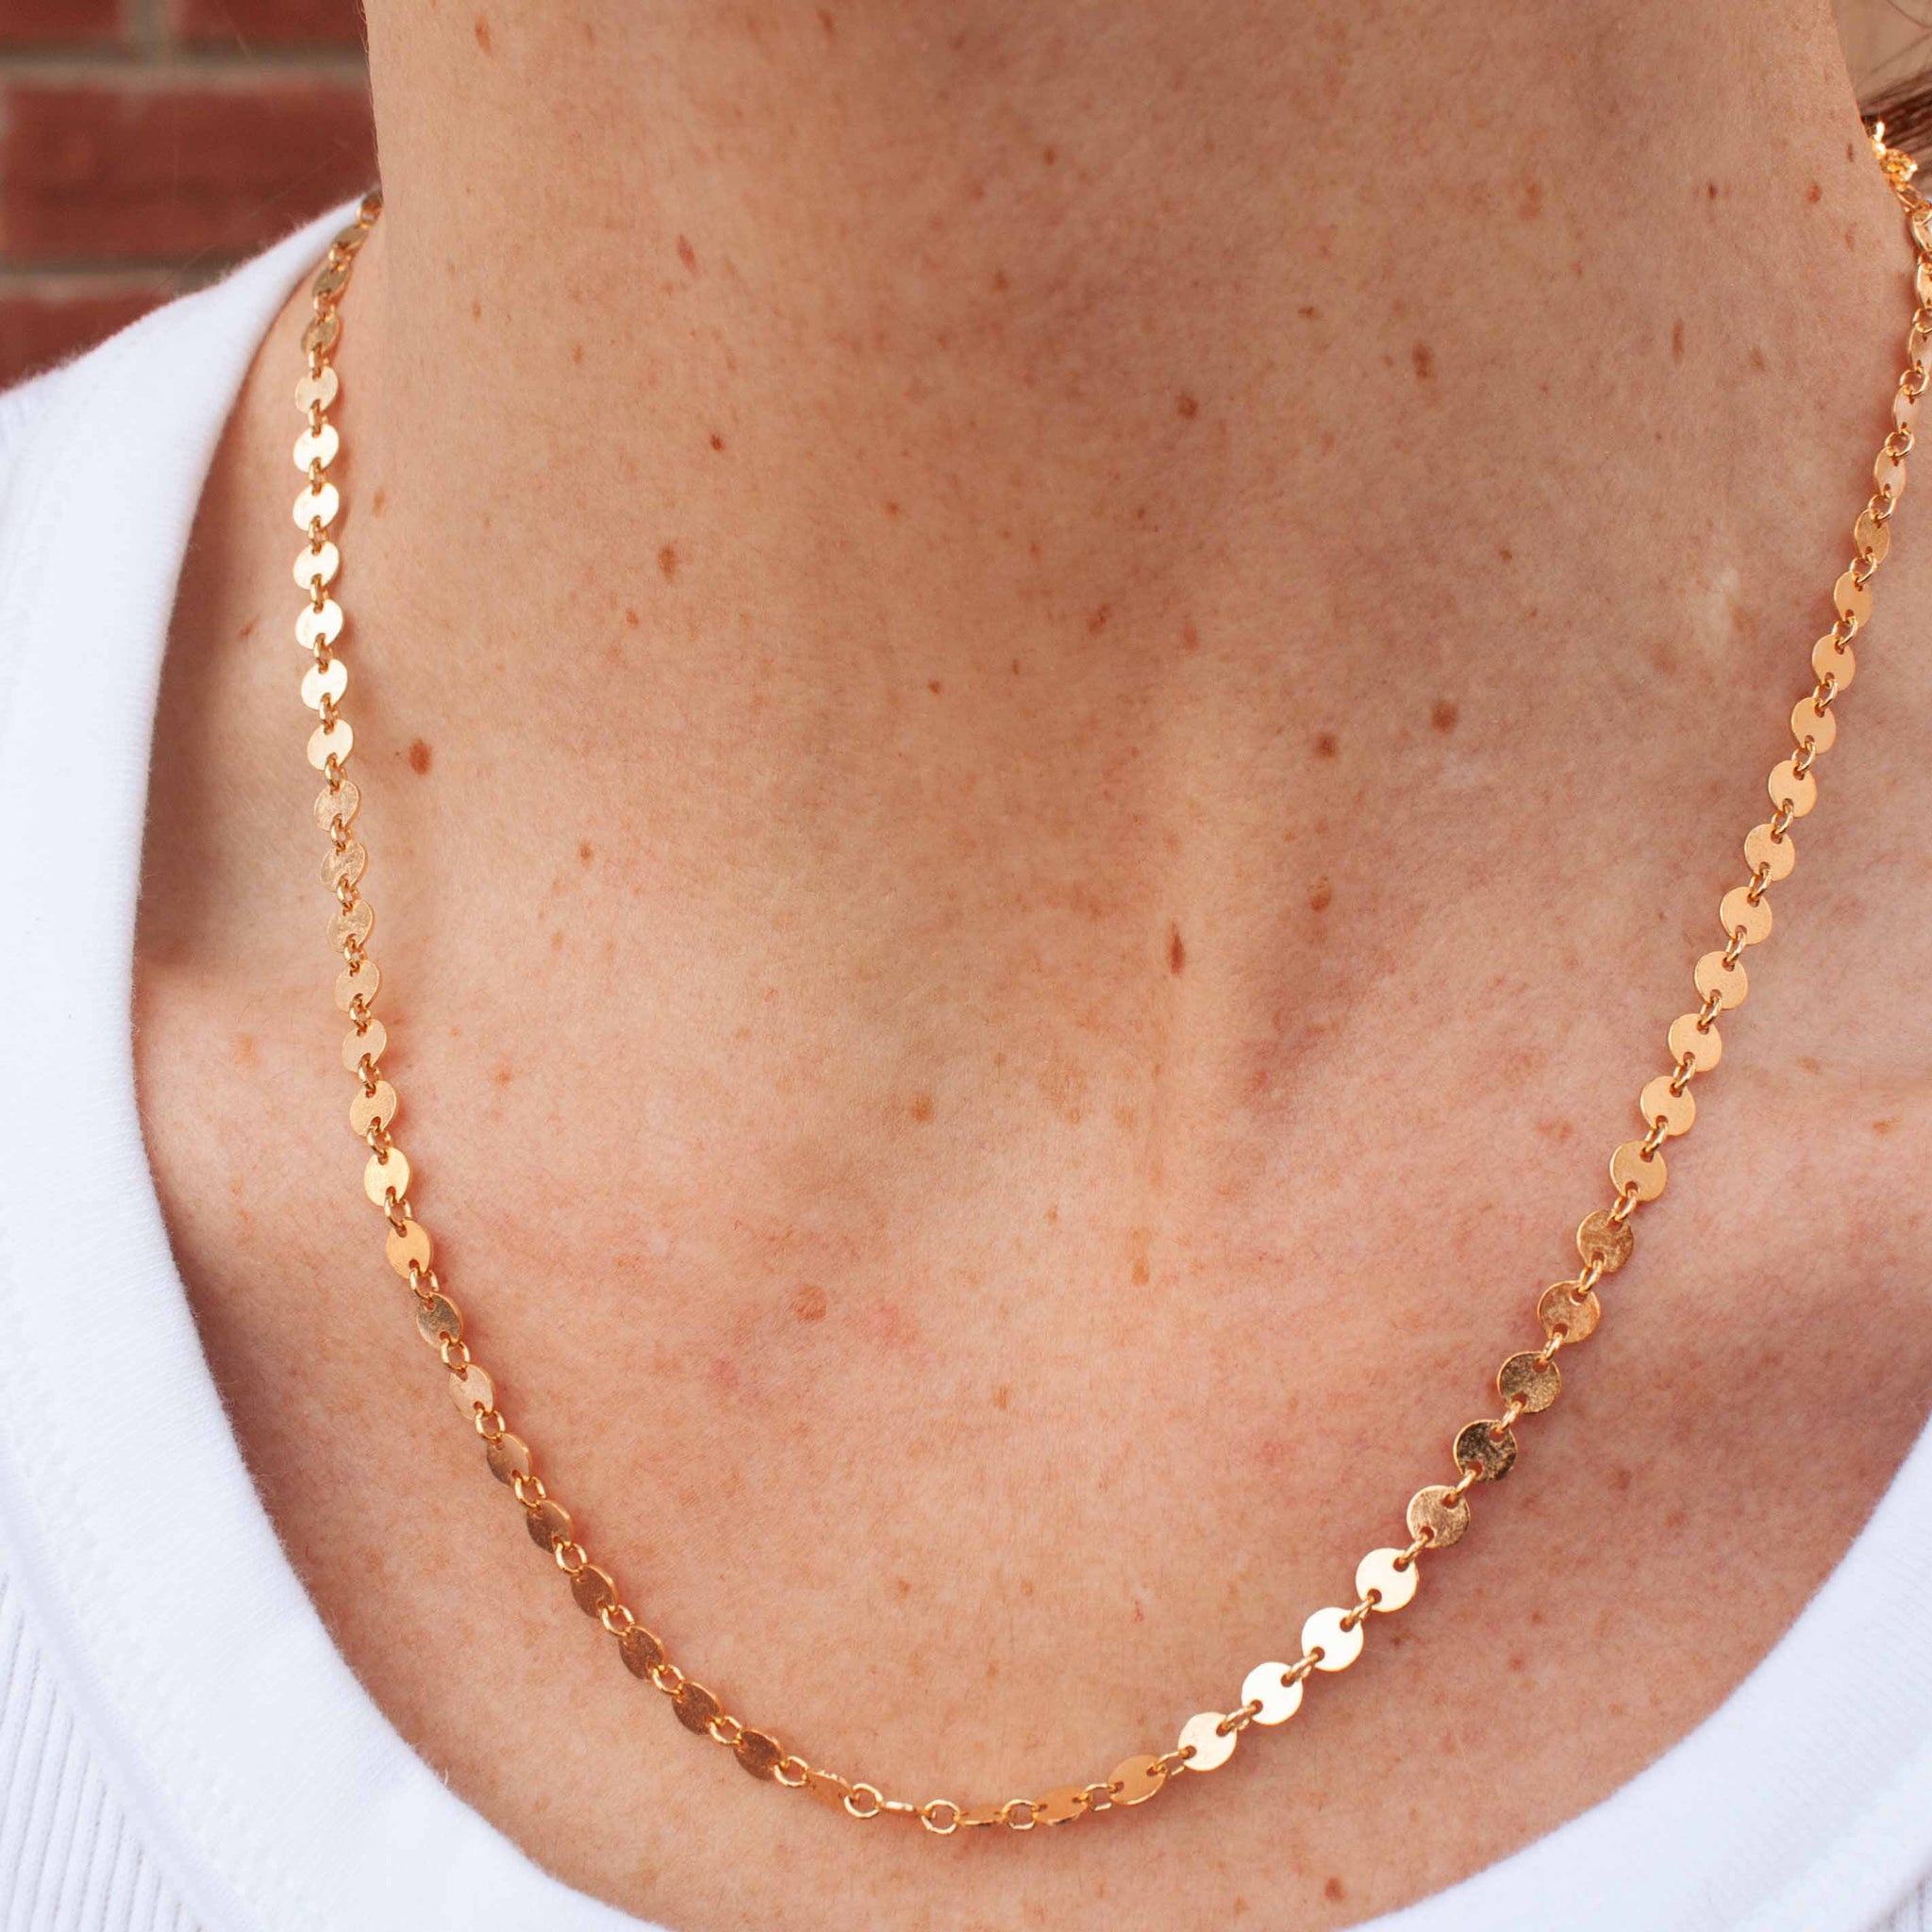 For LOVE of simplicity and classic elegance. 16 or 18 inch 14 karat gold filled* coin link chain. *Gold-filled jewelry is composed of a solid layer of gold, mechanically bonded to sterling silver. you are fine to shower in it, get it wet, wear it for life! kp jewelry co.